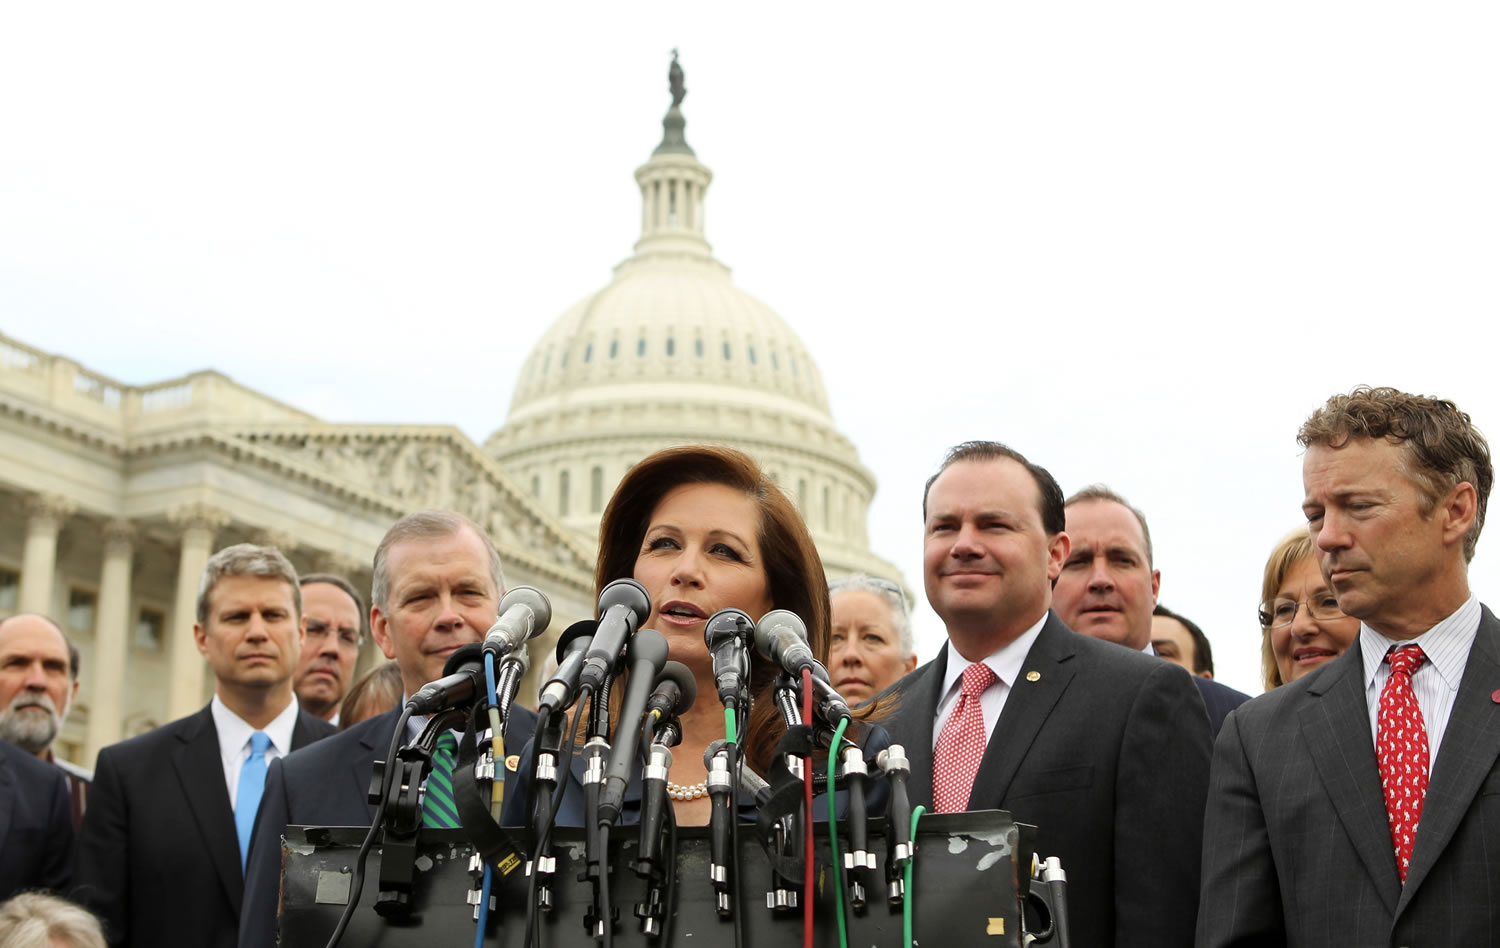 Rep. Michele Bachmann, R-Minn., chair of the Tea Party Caucus, center, speaks on Capitol Hill in Washington on Thursday during a news conference with Tea Party leaders to discuss the IRS targeting Tea Party groups. From right are, Sen. Rand Paul, R-Ky., Sen.